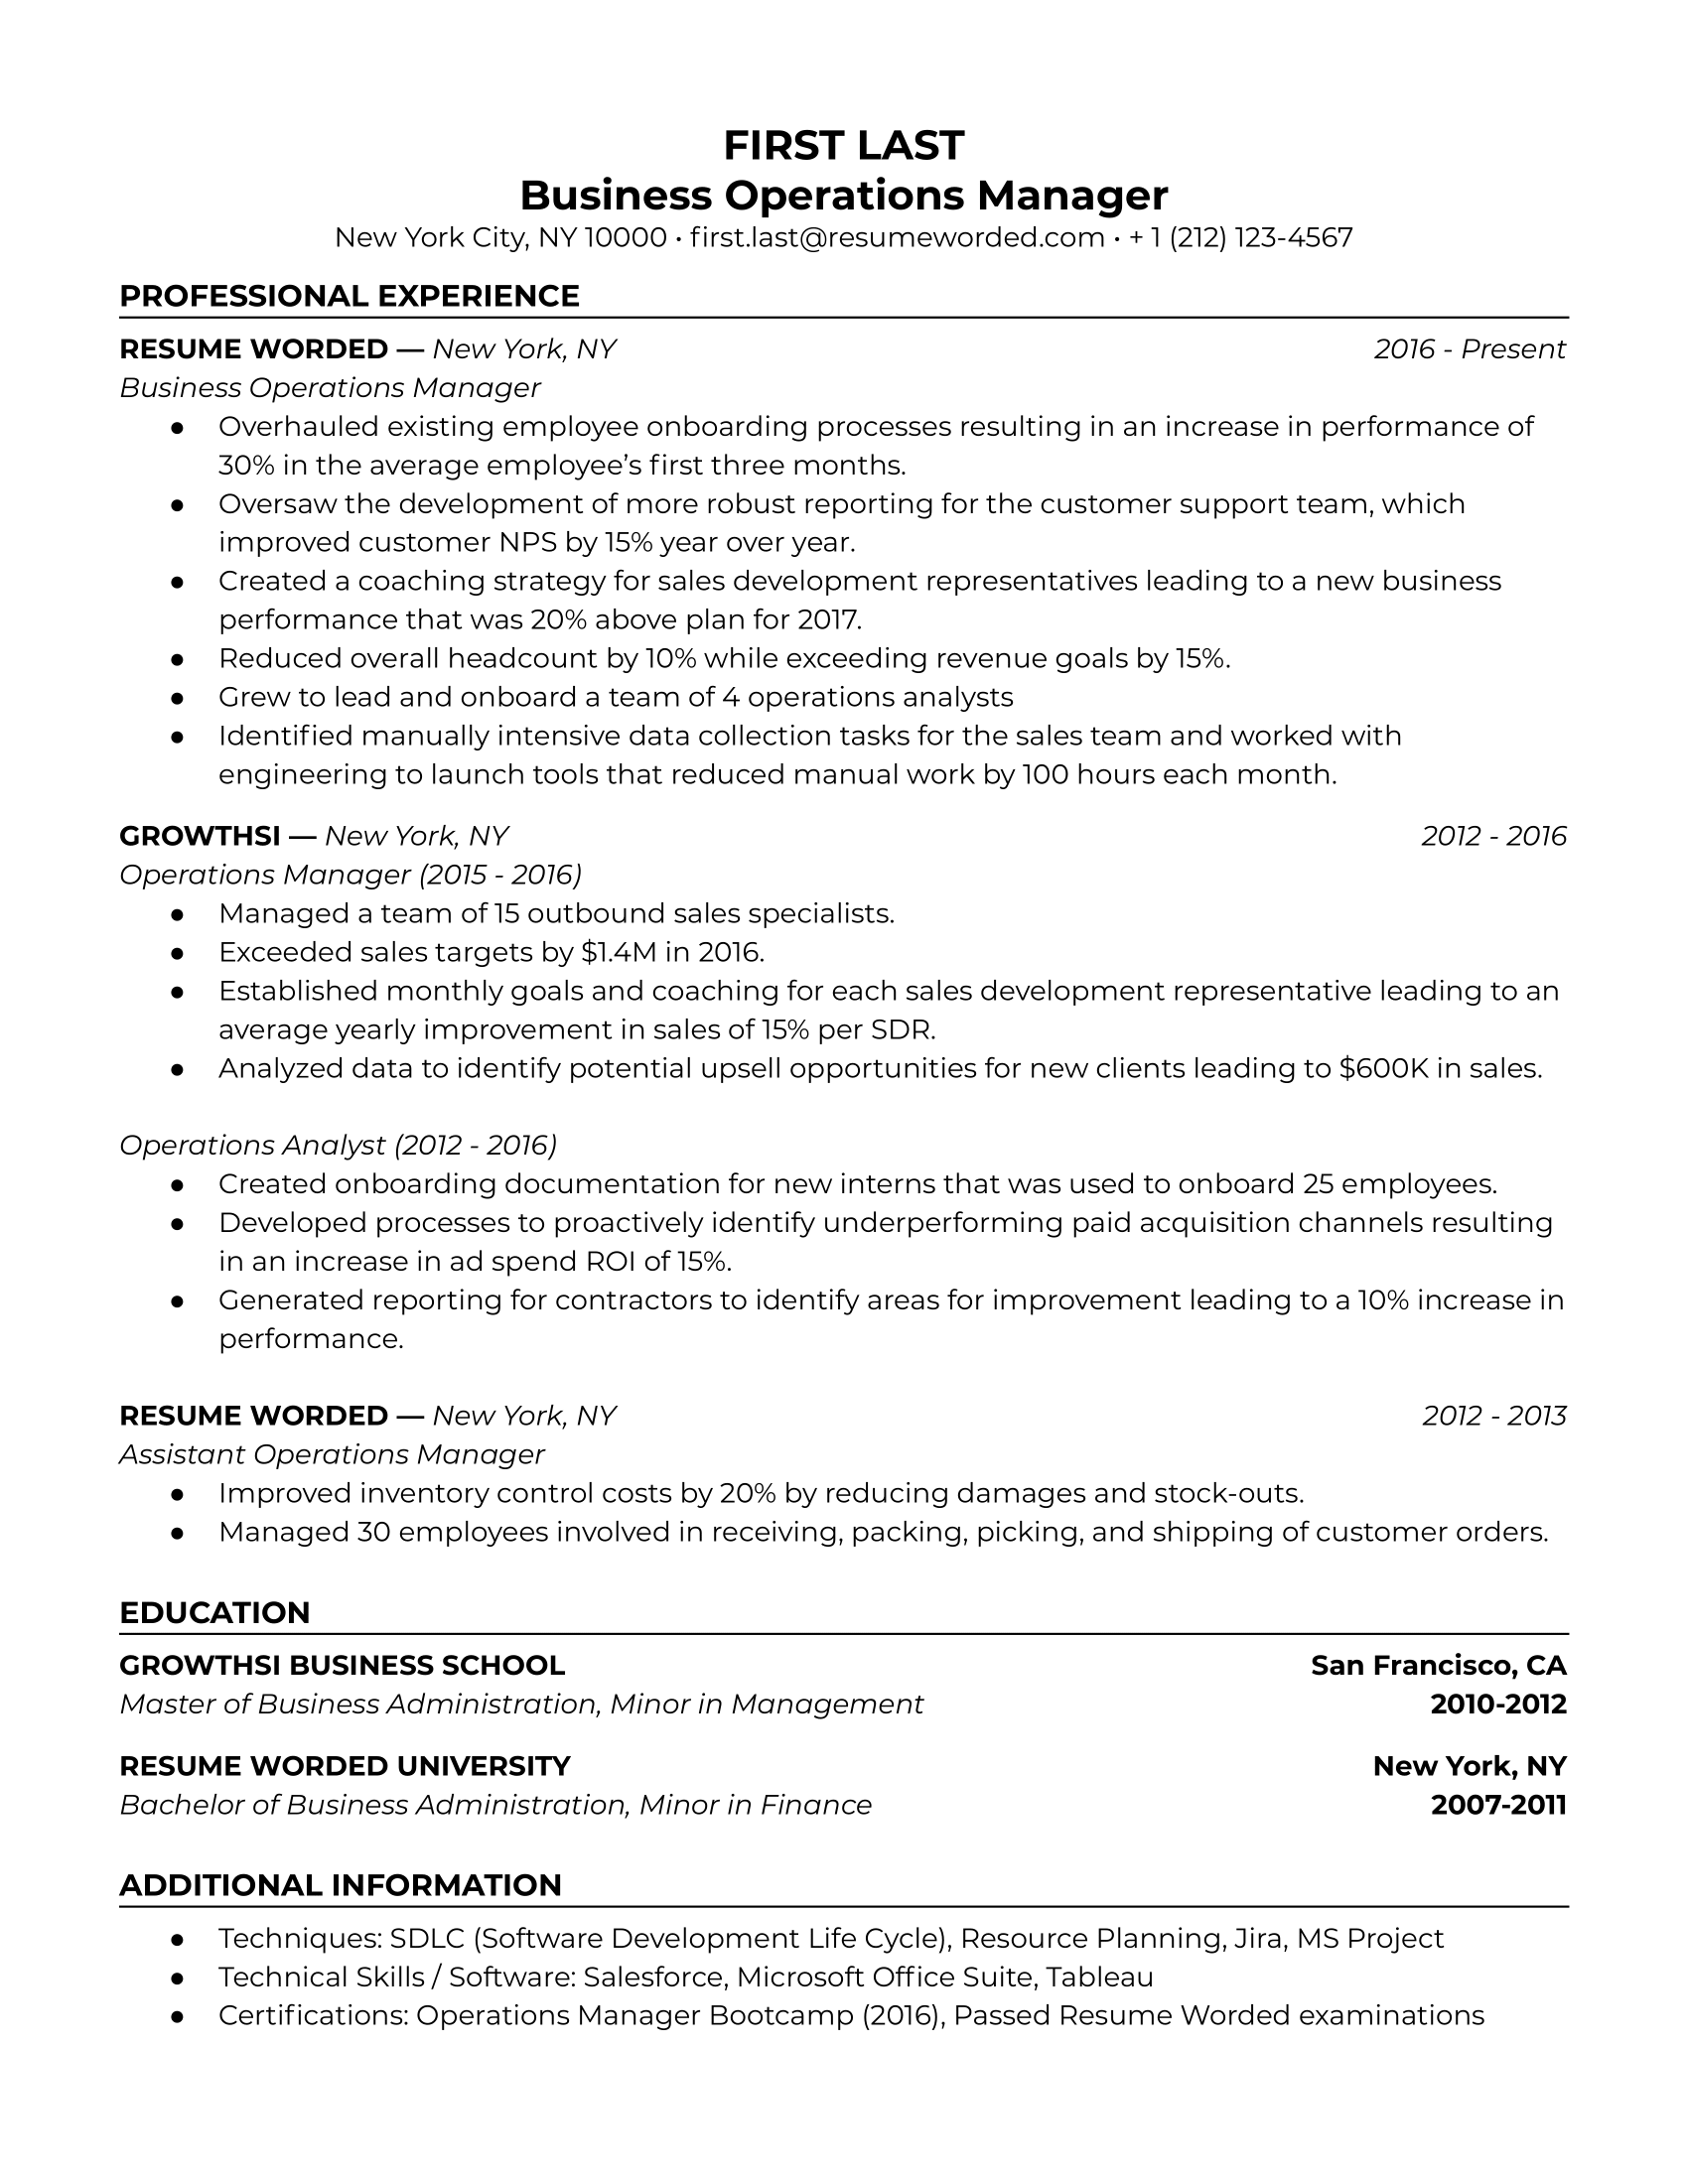 Business Operations Manager Resume Template + Example